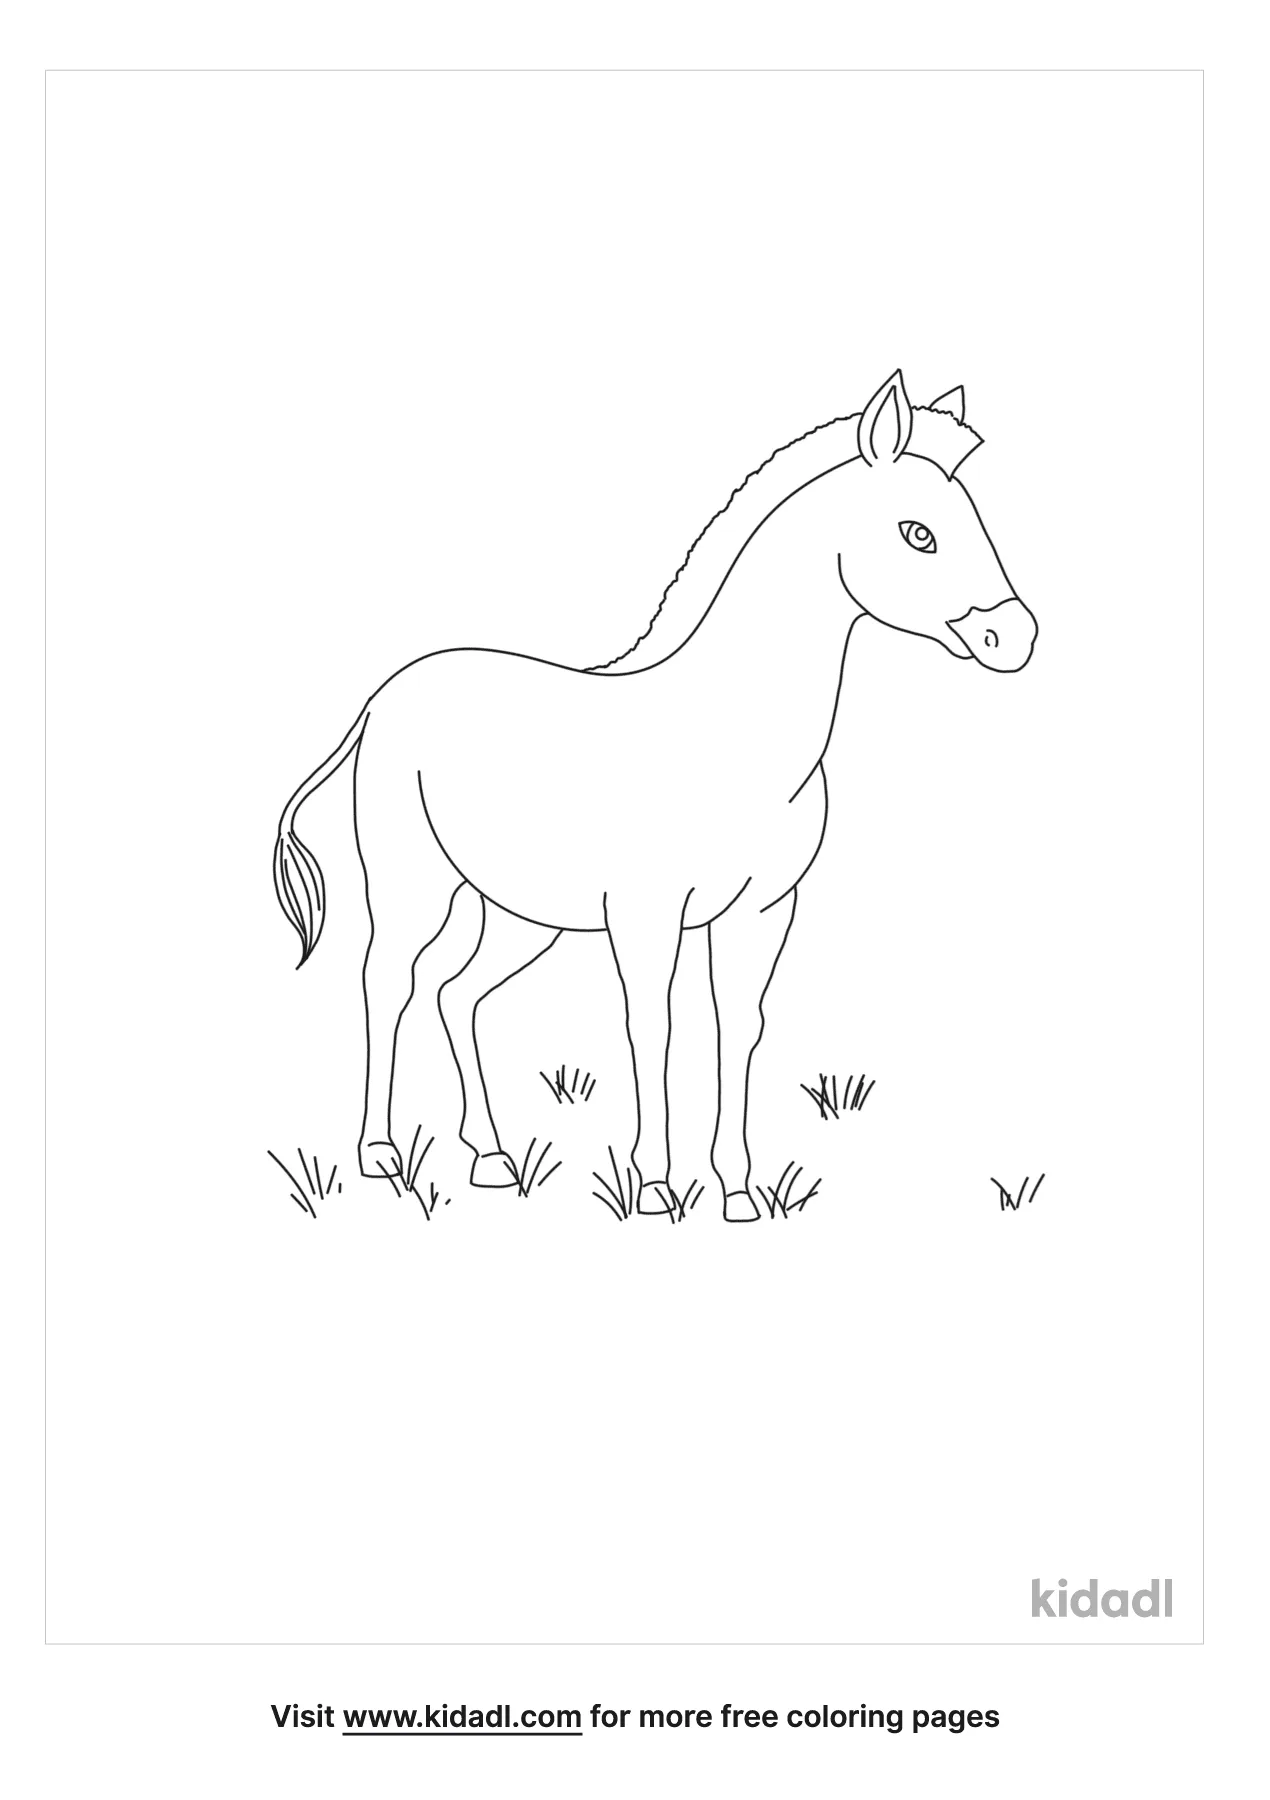 Zebra With No Stripes Coloring Page